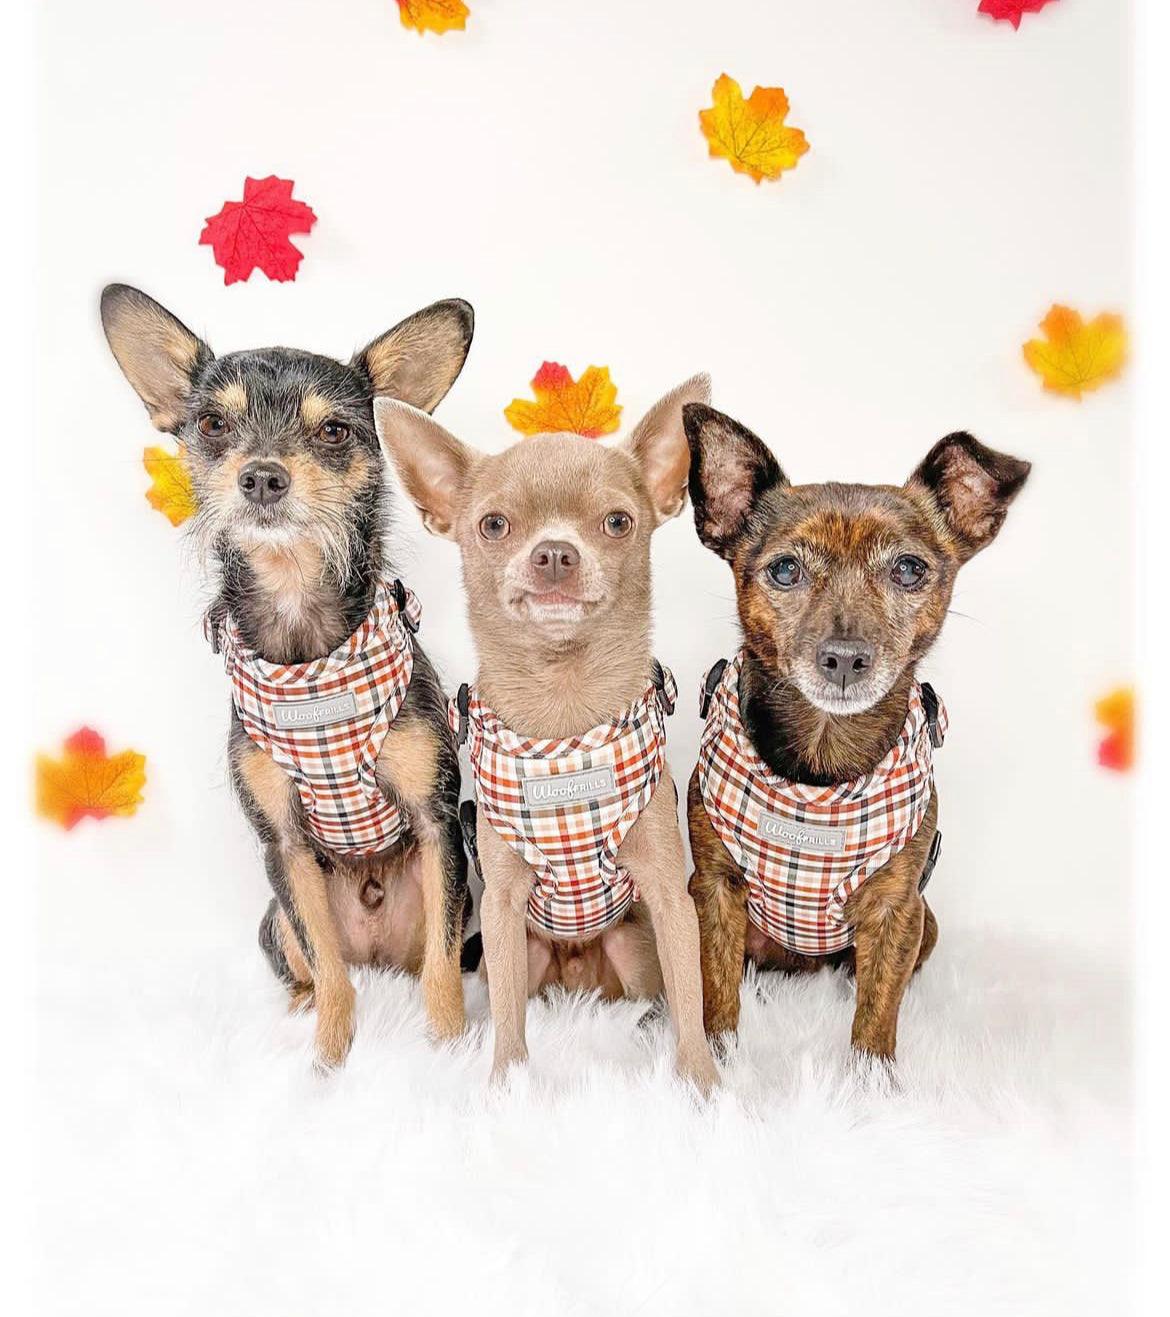 Three dogs wearing matching dog harnesses